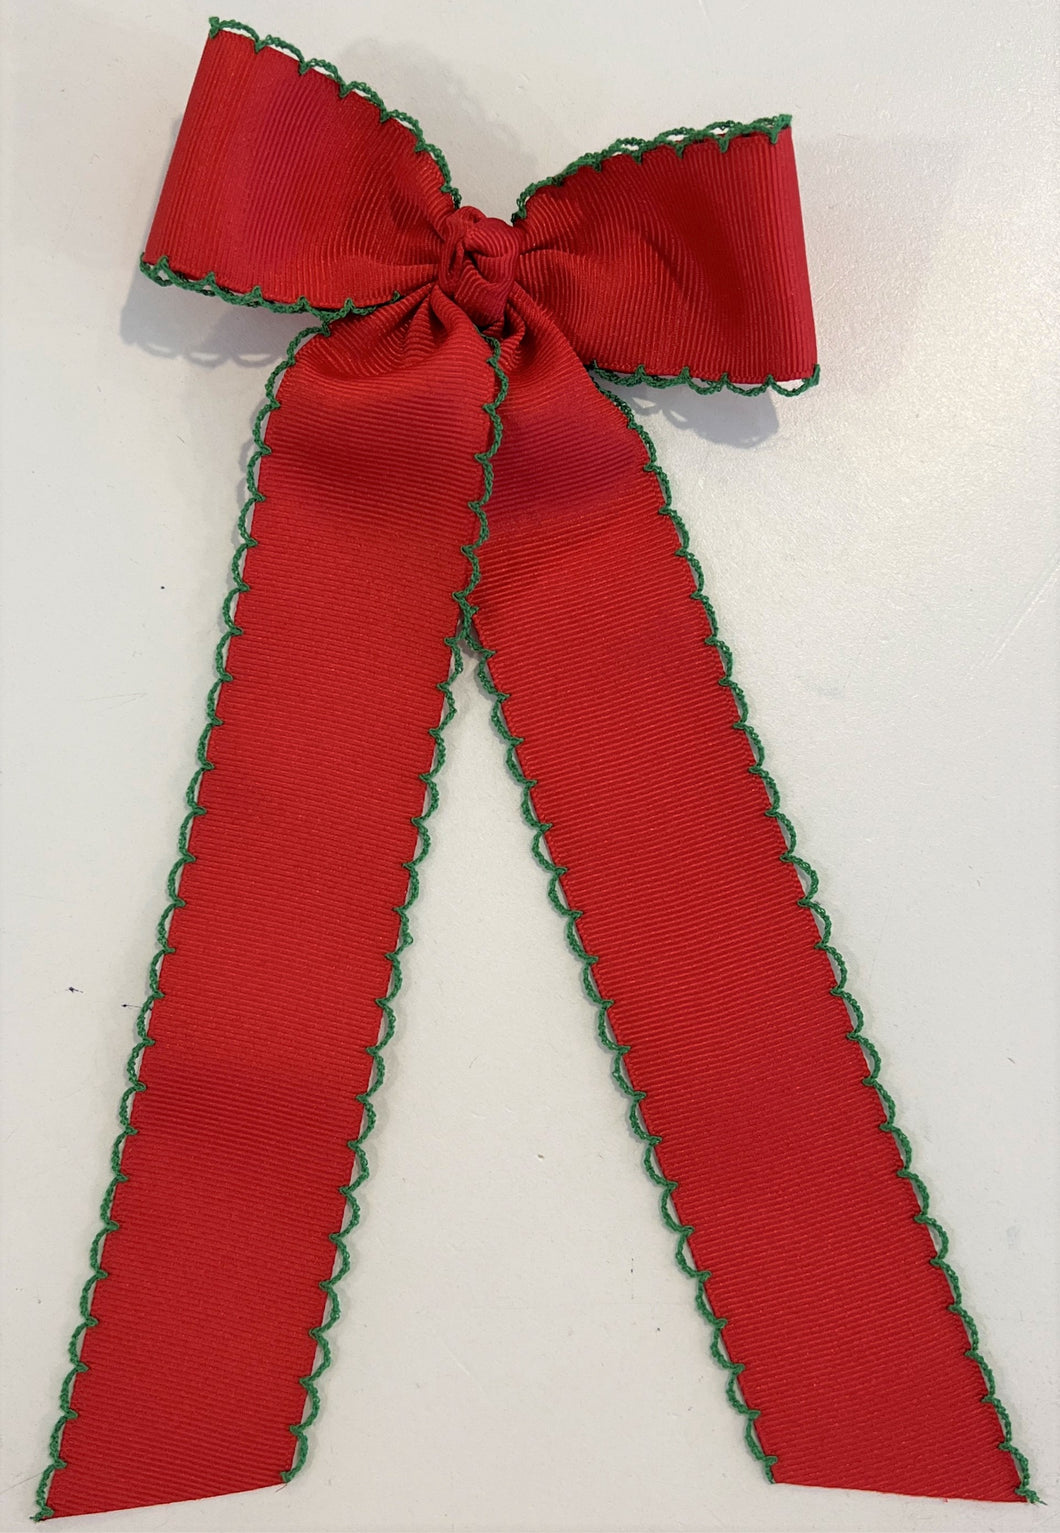 Moonstitch Bowtie with Streamer Tails - Red w/ Green